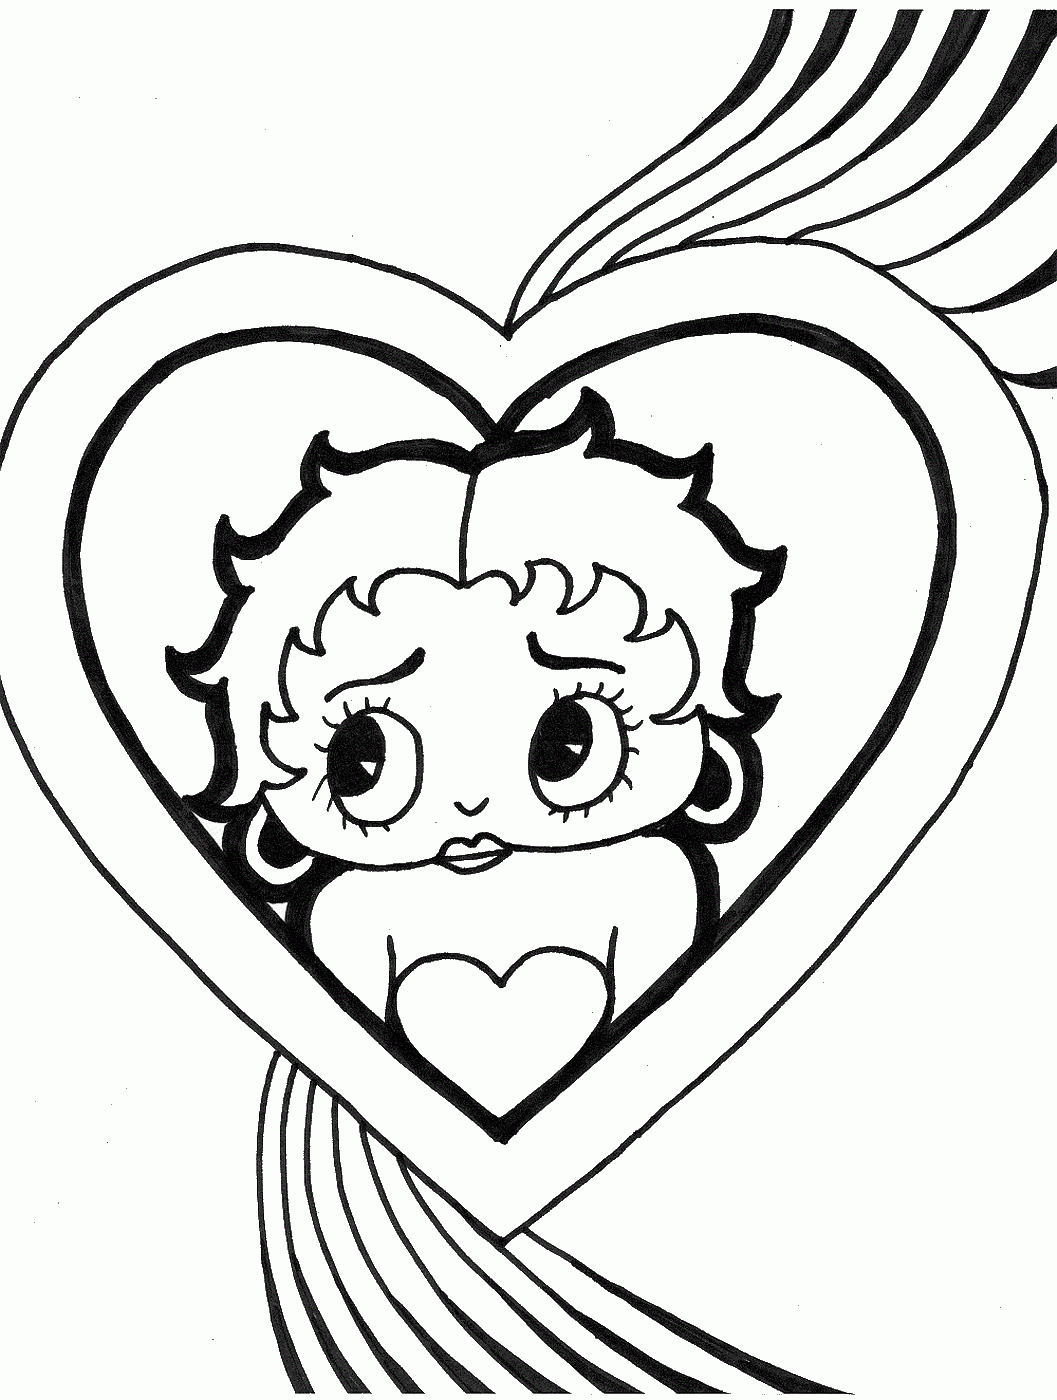 Hearts Coloring Pages